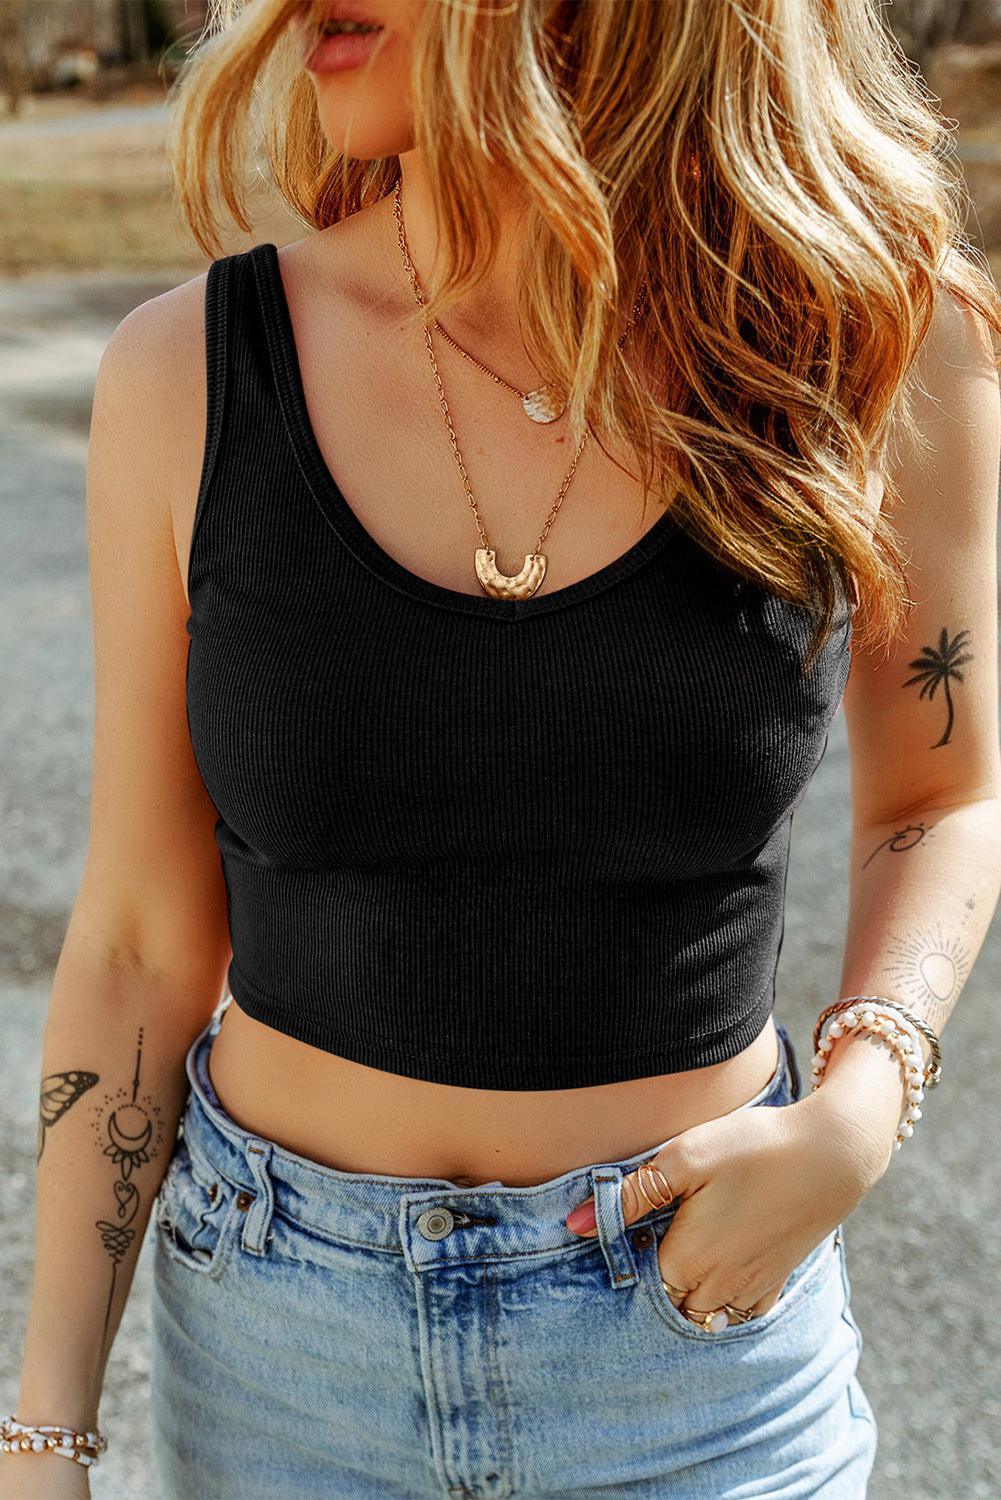 a woman wearing a black crop top and jeans